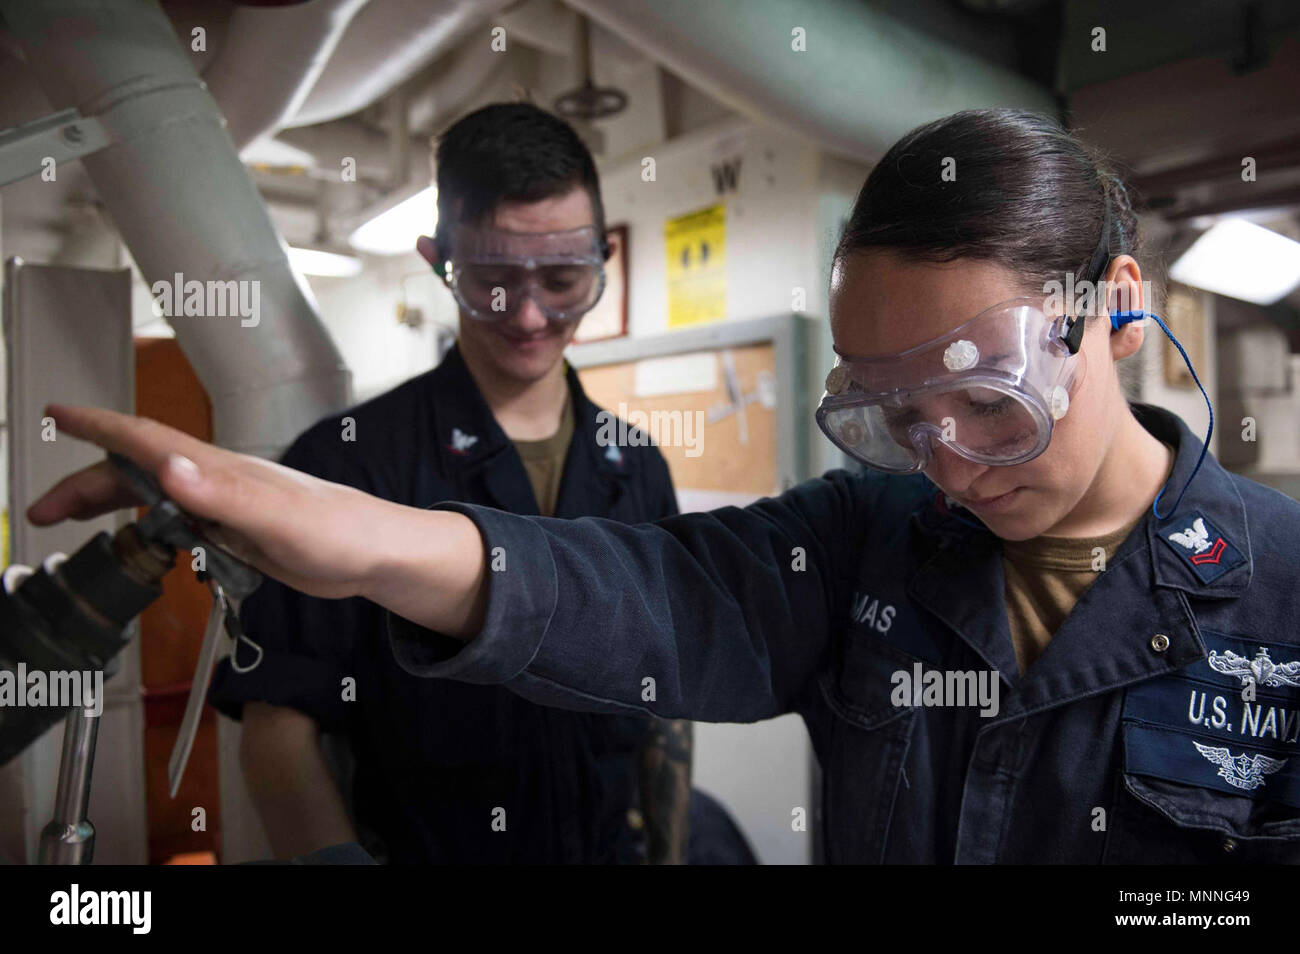 MEDITERRANEAN SEA (March 13, 2018) Damage Controlman 2nd Class Julie Sesmas does checks on an air relief valve aboard the Arleigh Burke-class guided-missile destroyer USS Donald Cook (DDG 75) March 13, 2018. Donald Cook, forward-deployed to Rota, Spain, is on its seventh patrol in the U.S. 6th Fleet area of operations in support of regional allies and partners, and U.S. national security interests in Europe and Africa. Stock Photo